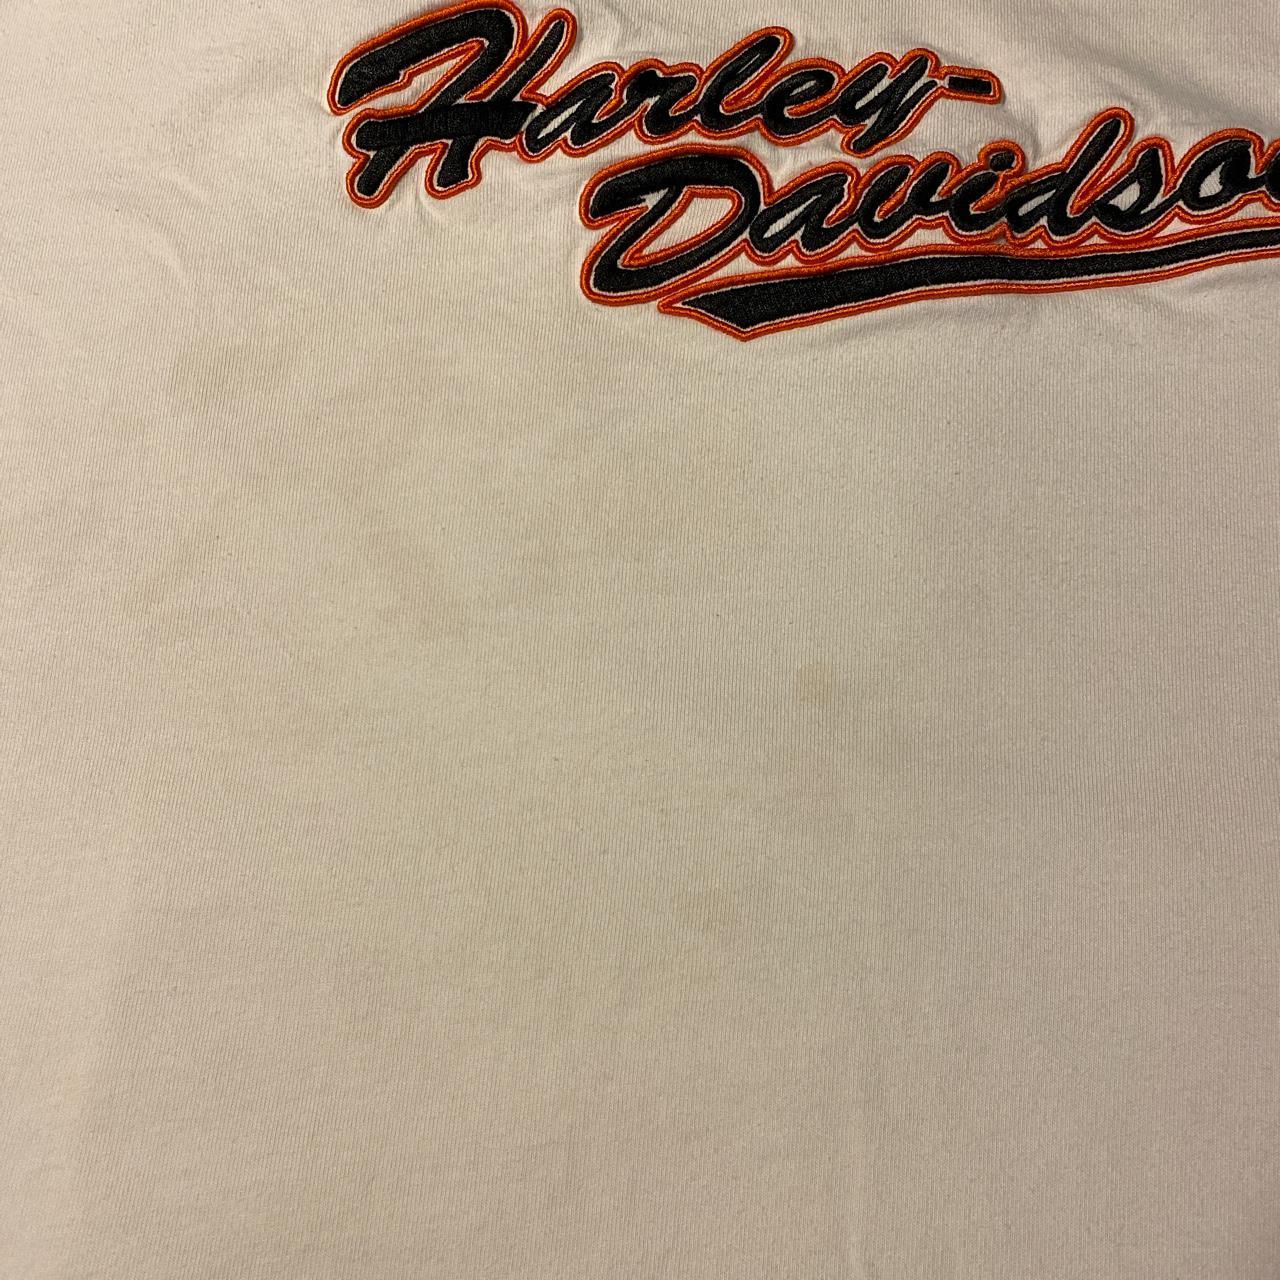 Product Image 2 - Harley Davidson Embroidered T-Shirt

Size -